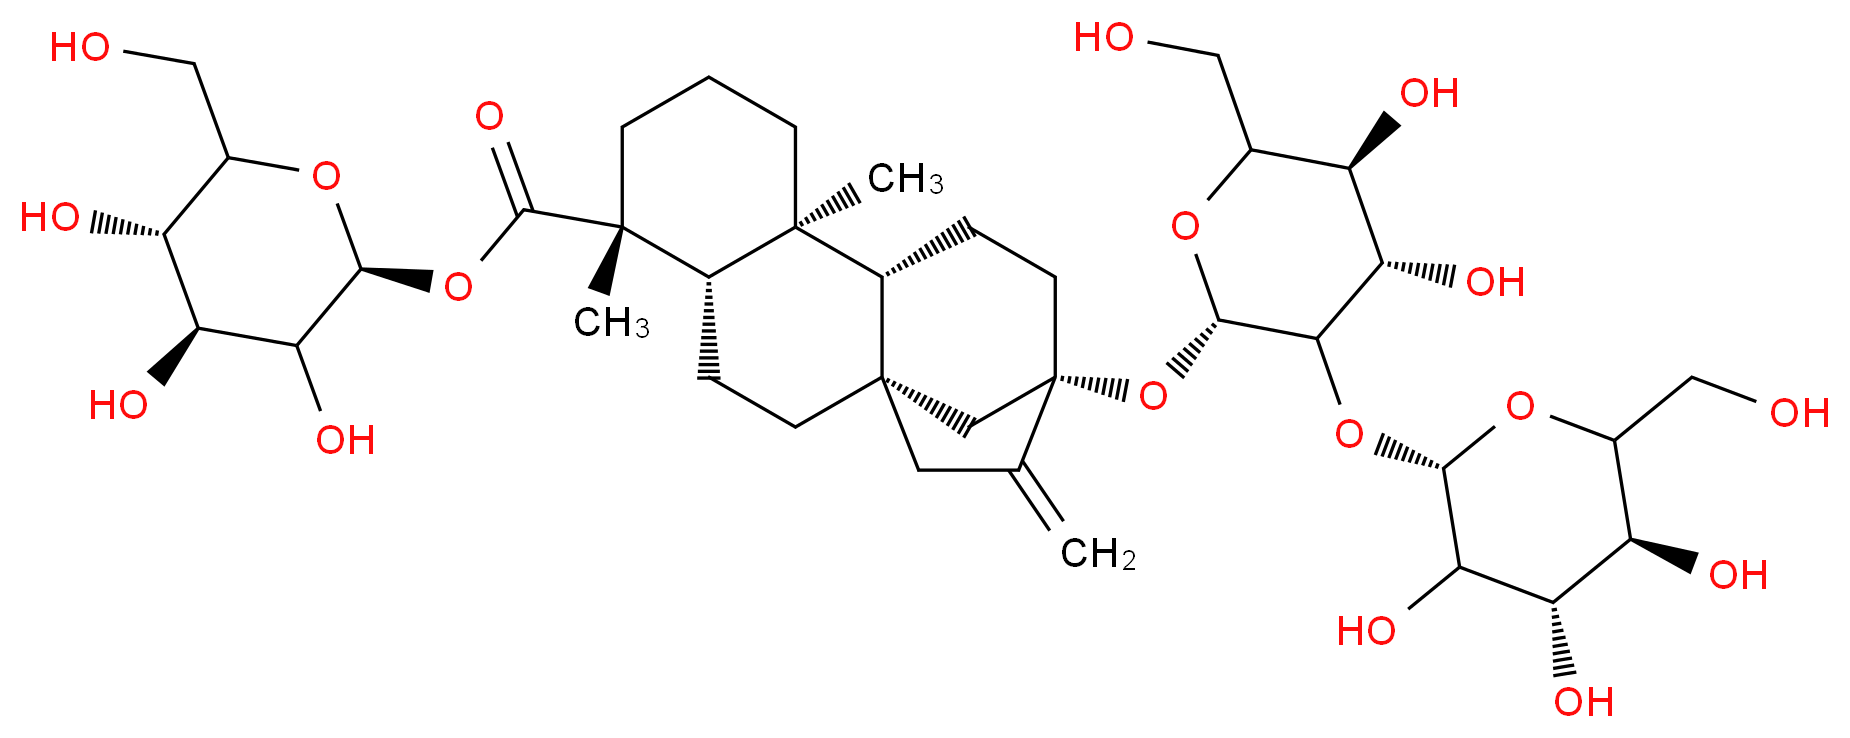 (2S,4S,5S)-3,4,5-trihydroxy-6-(hydroxymethyl)oxan-2-yl (1R,4S,5R,9S,10R,13S)-13-{[(2S,4S,5S)-4,5-dihydroxy-6-(hydroxymethyl)-3-{[(2S,4S,5S)-3,4,5-trihydroxy-6-(hydroxymethyl)oxan-2-yl]oxy}oxan-2-yl]oxy}-5,9-dimethyl-14-methylidenetetracyclo[11.2.1.0<sup>1</sup>,<sup>1</sup><sup>0</sup>.0<sup>4</sup>,<sup>9</sup>]hexadecane-5-carboxylate_分子结构_CAS_57817-89-7